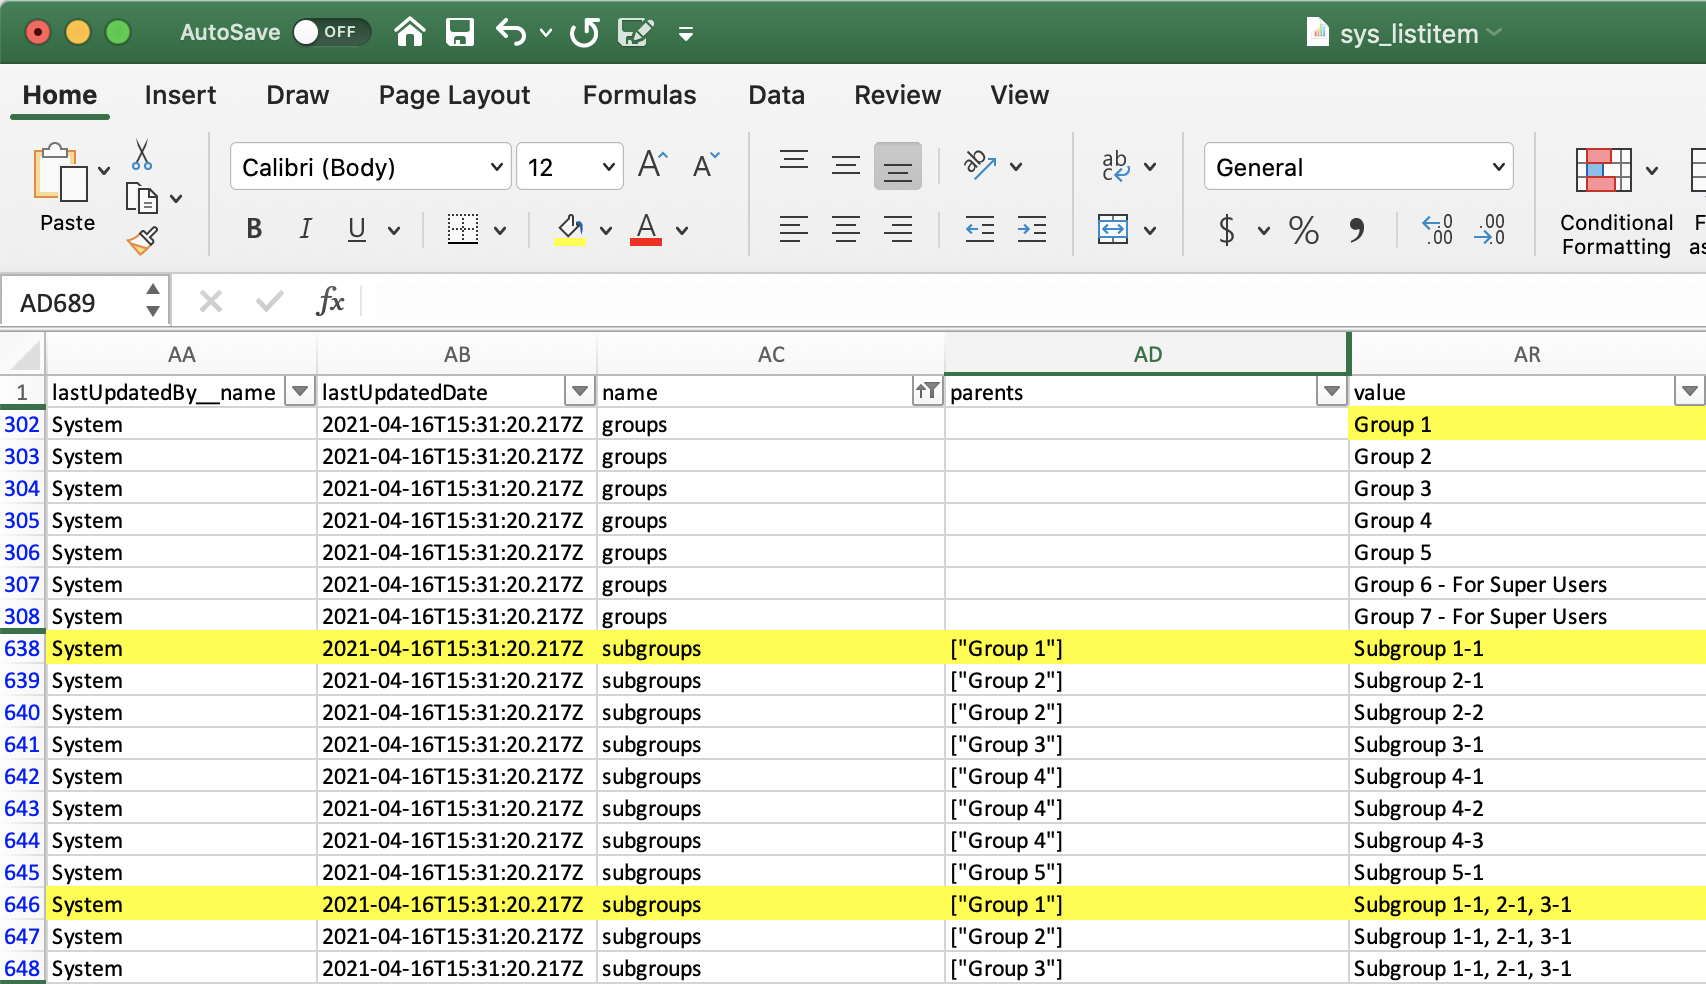 The picklist CSV in Excel where the Group 1 picklist value and the child picklist values “Subgroup 1-1” and “Subgroup 1-1, 2-1, 3-1” have been highlighted.